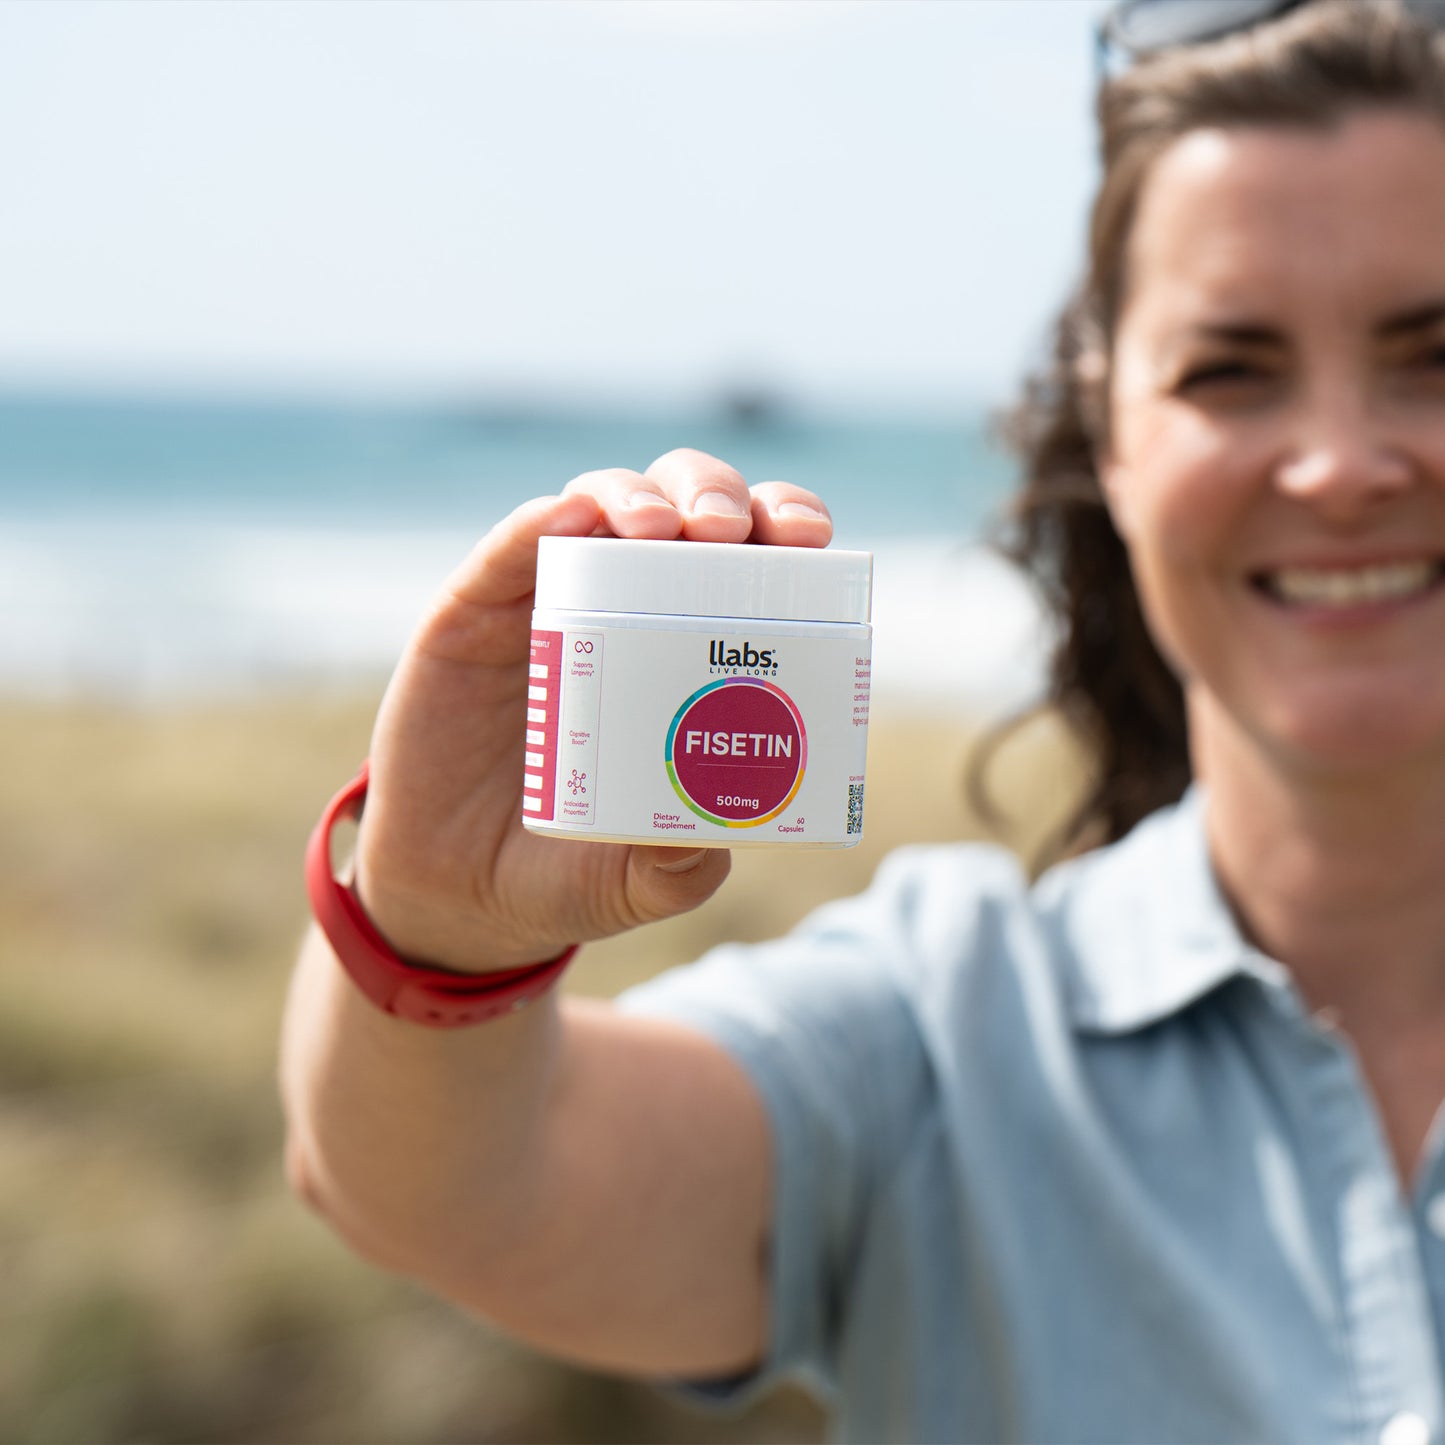 A smiling woman holding up a bottle of llabs Fisetin capsules towards the camera, standing outdoors with a sunny beach background.